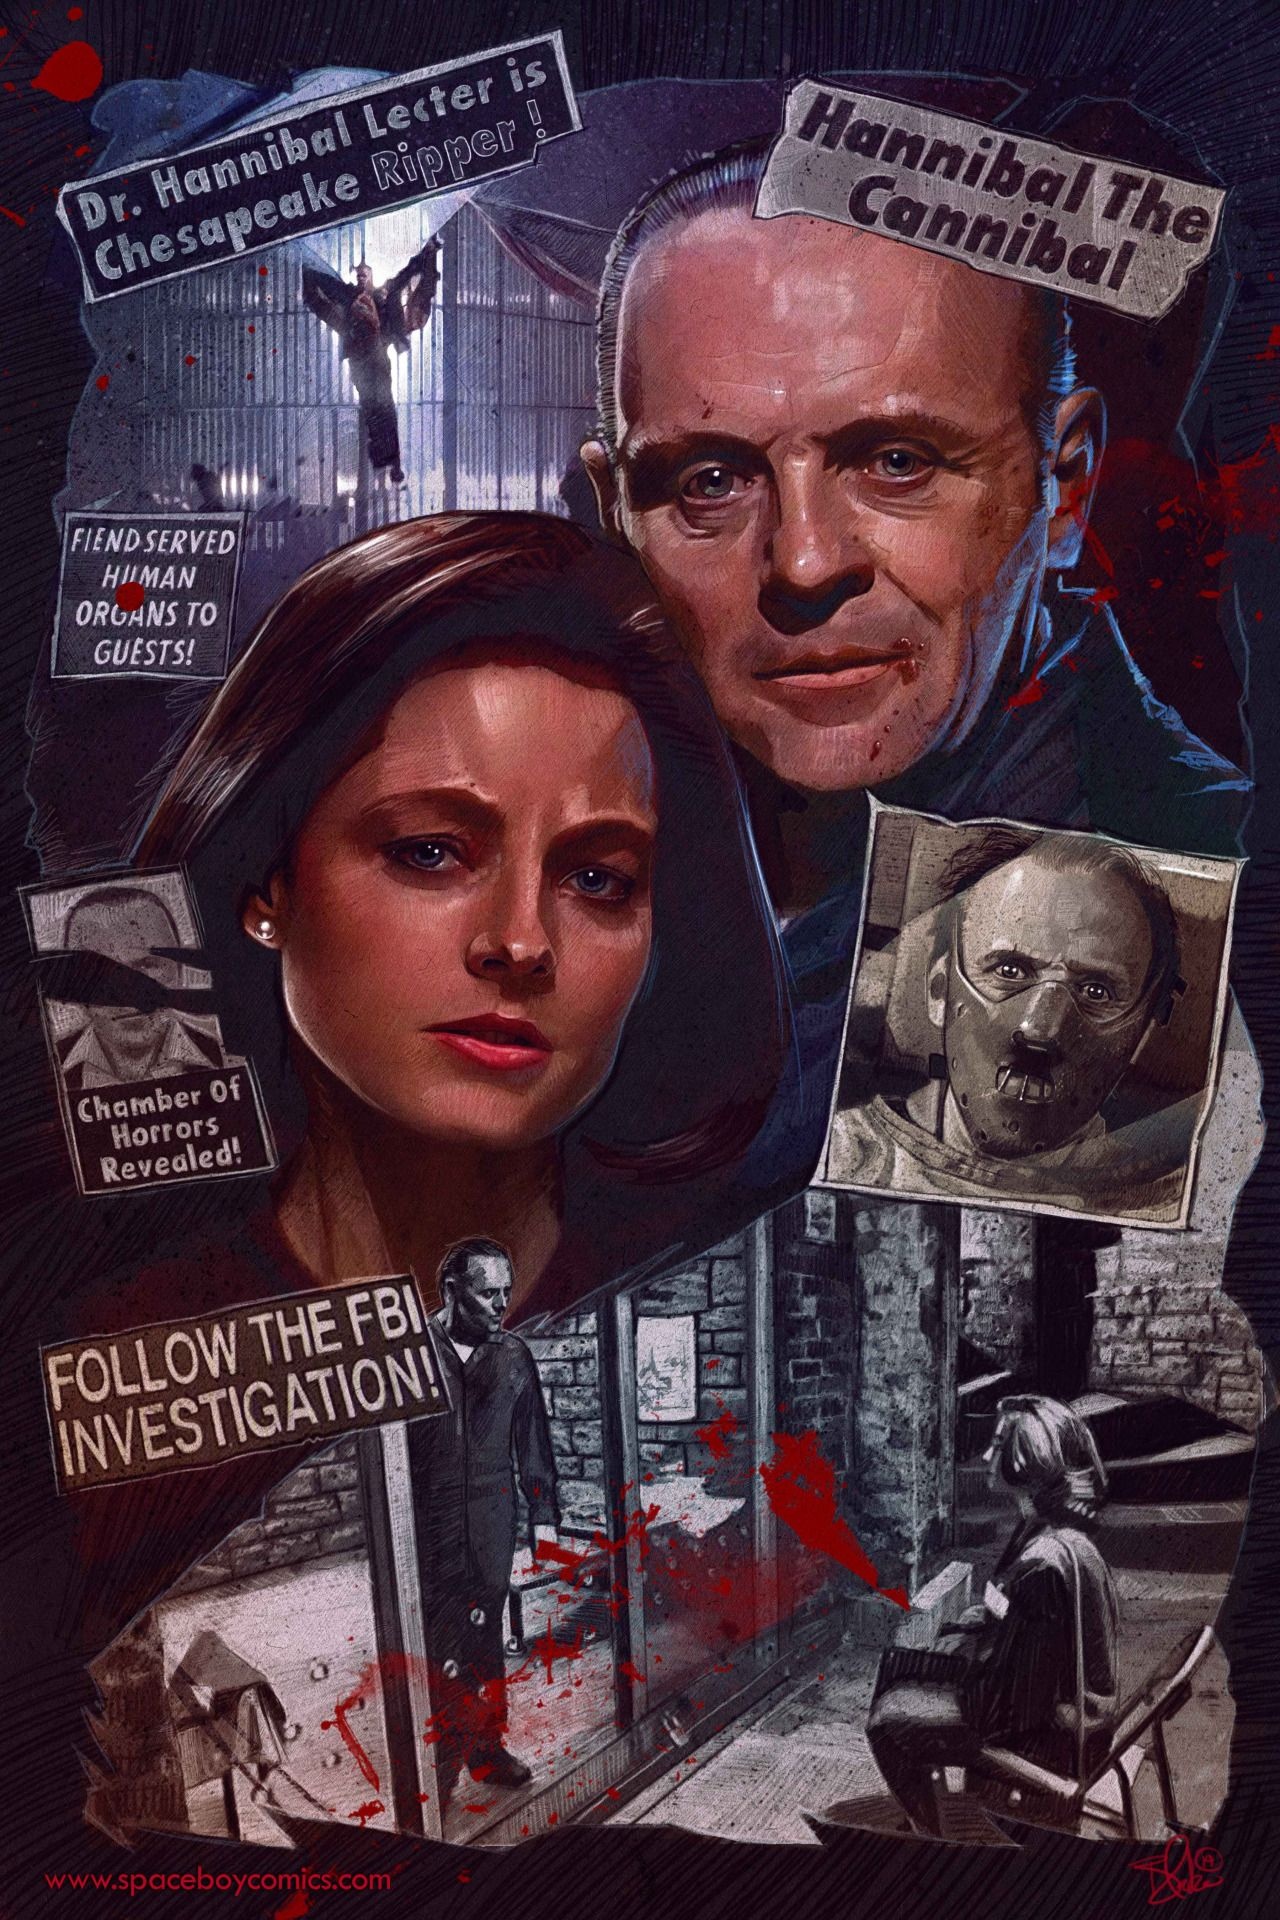 Silence of the Lambs Tumblr, Hannibal movie fandom, Scary movie obsession, Dark and thrilling, 1280x1920 HD Phone